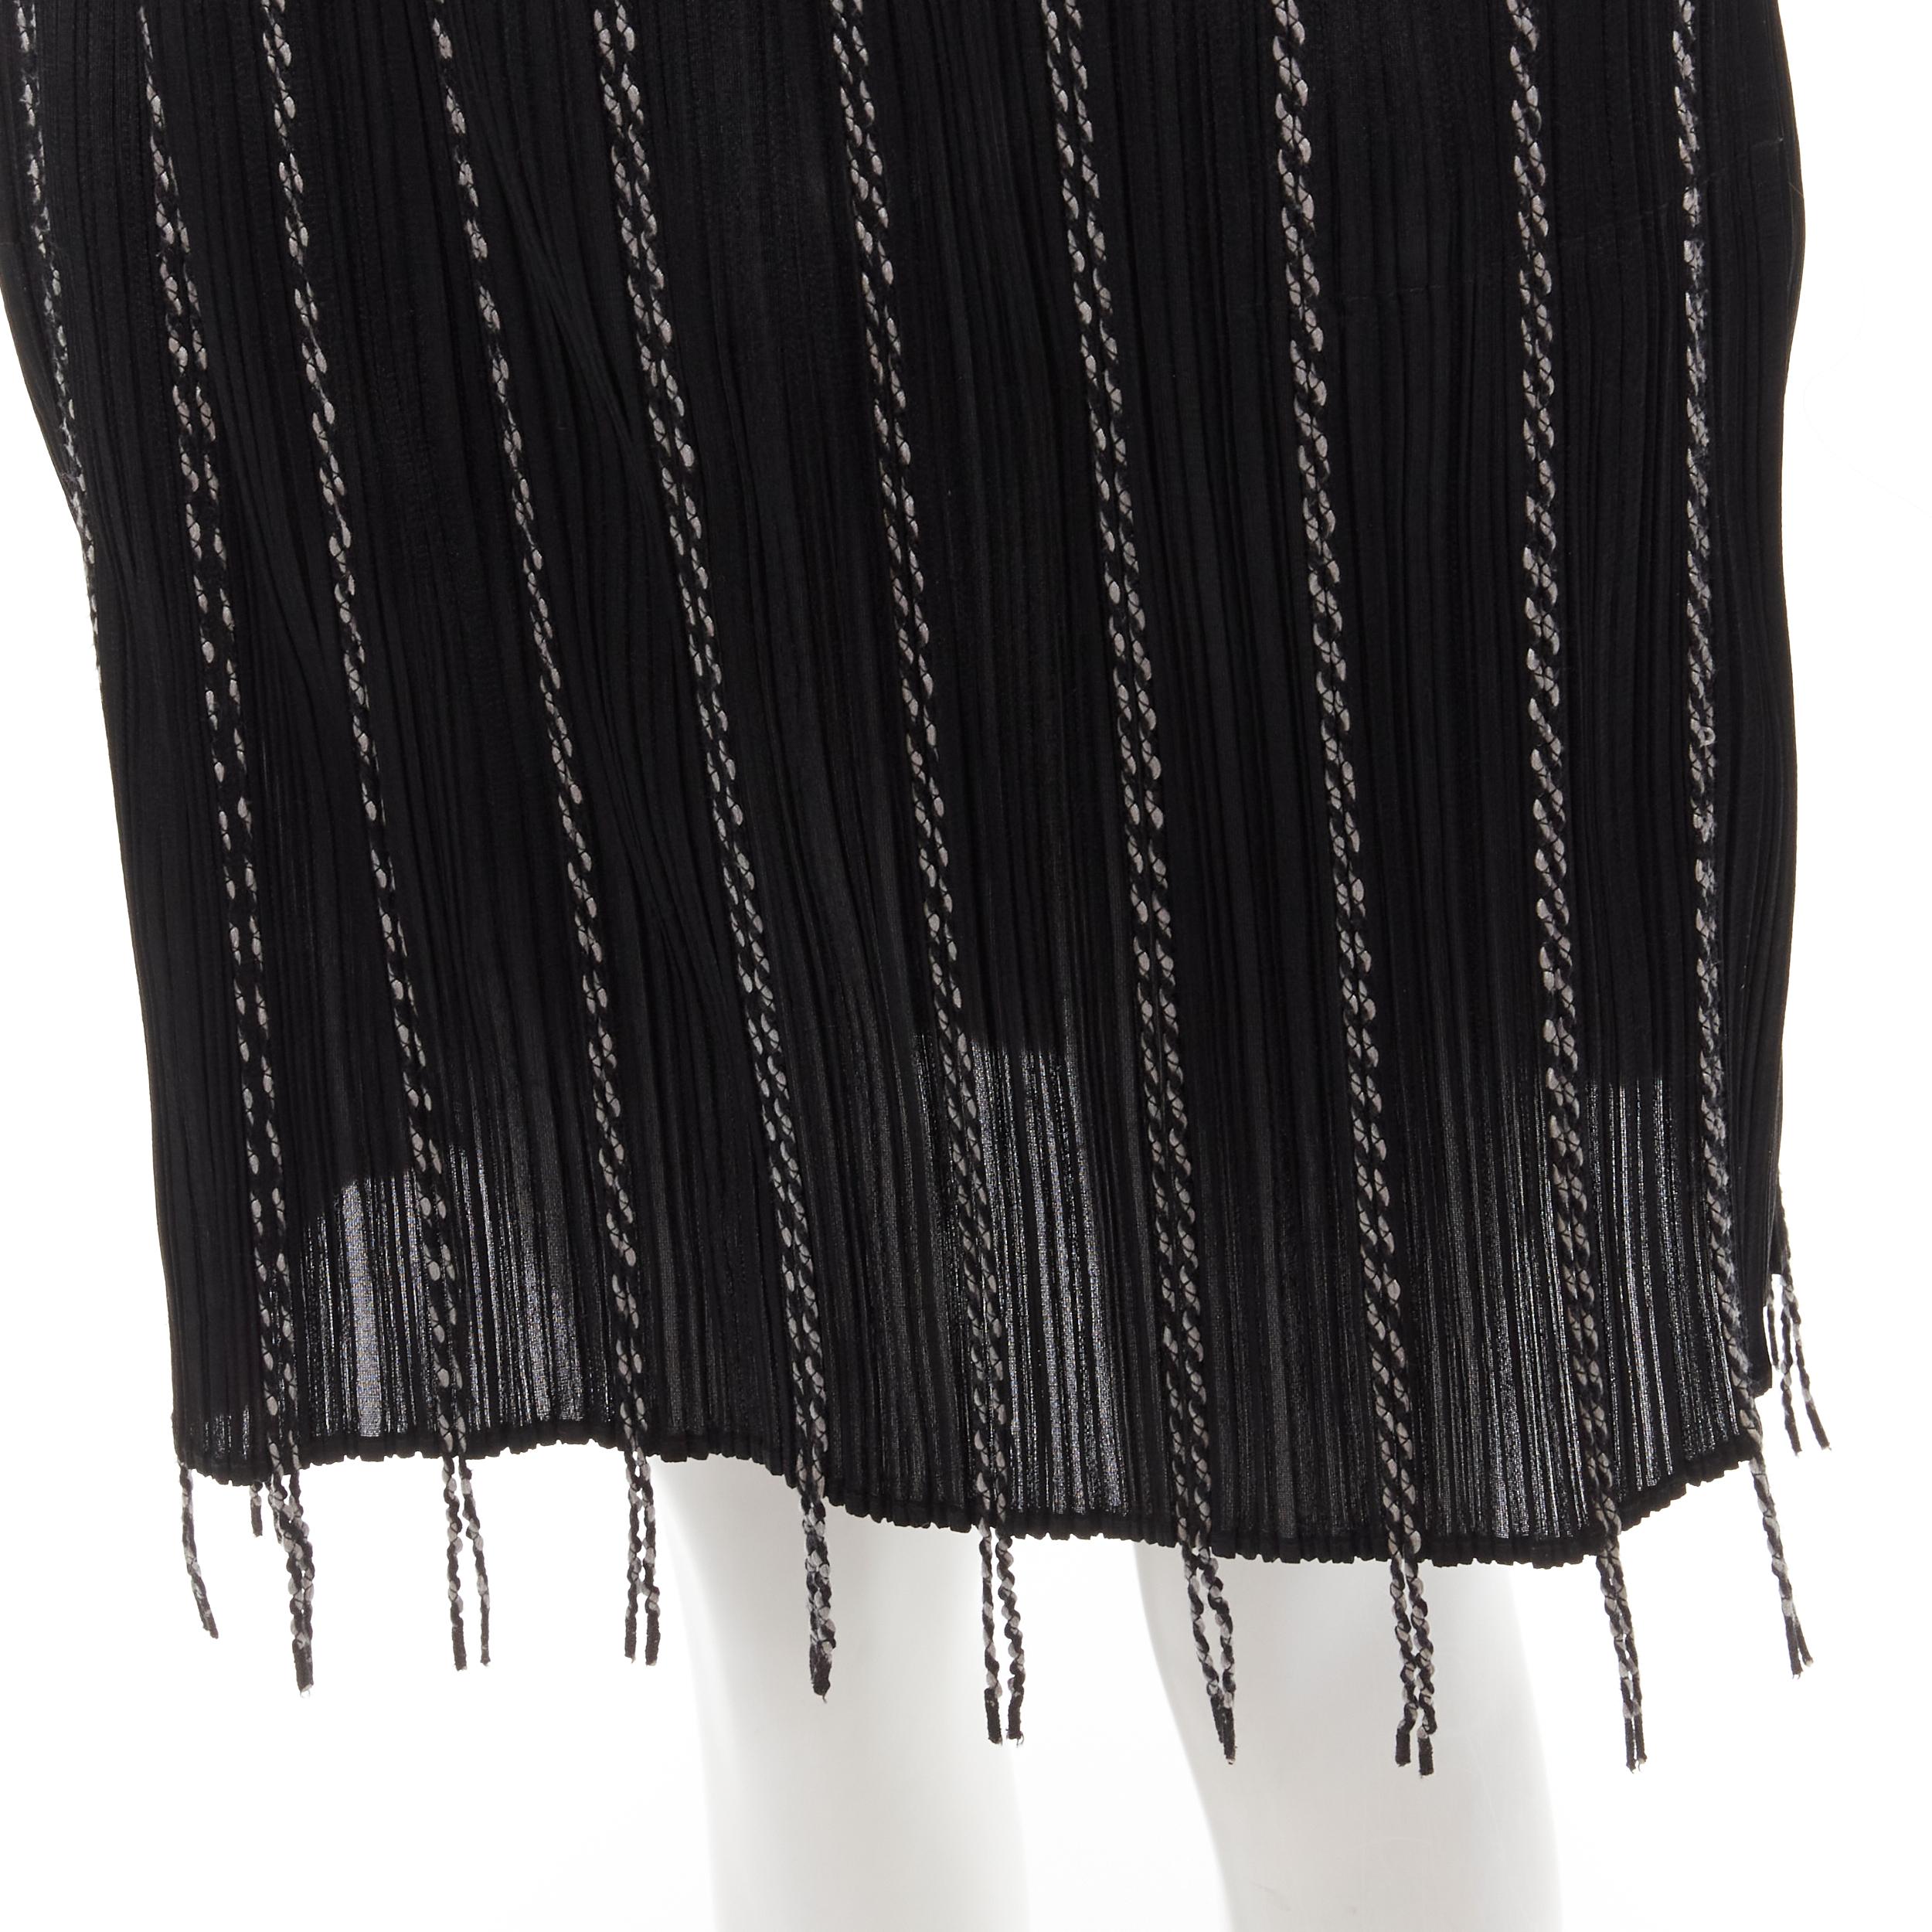 PLEATS PLEASE ISSEY MIYAKE black plisse pleated white fringe trim skirt JP3 L
Brand: Pleats Please Issey Miyake
Material: Polyester
Color: Black
Pattern: Solid
Extra Detail: Elasticated waist.
Made in: Japan

CONDITION:
Condition: Excellent, this